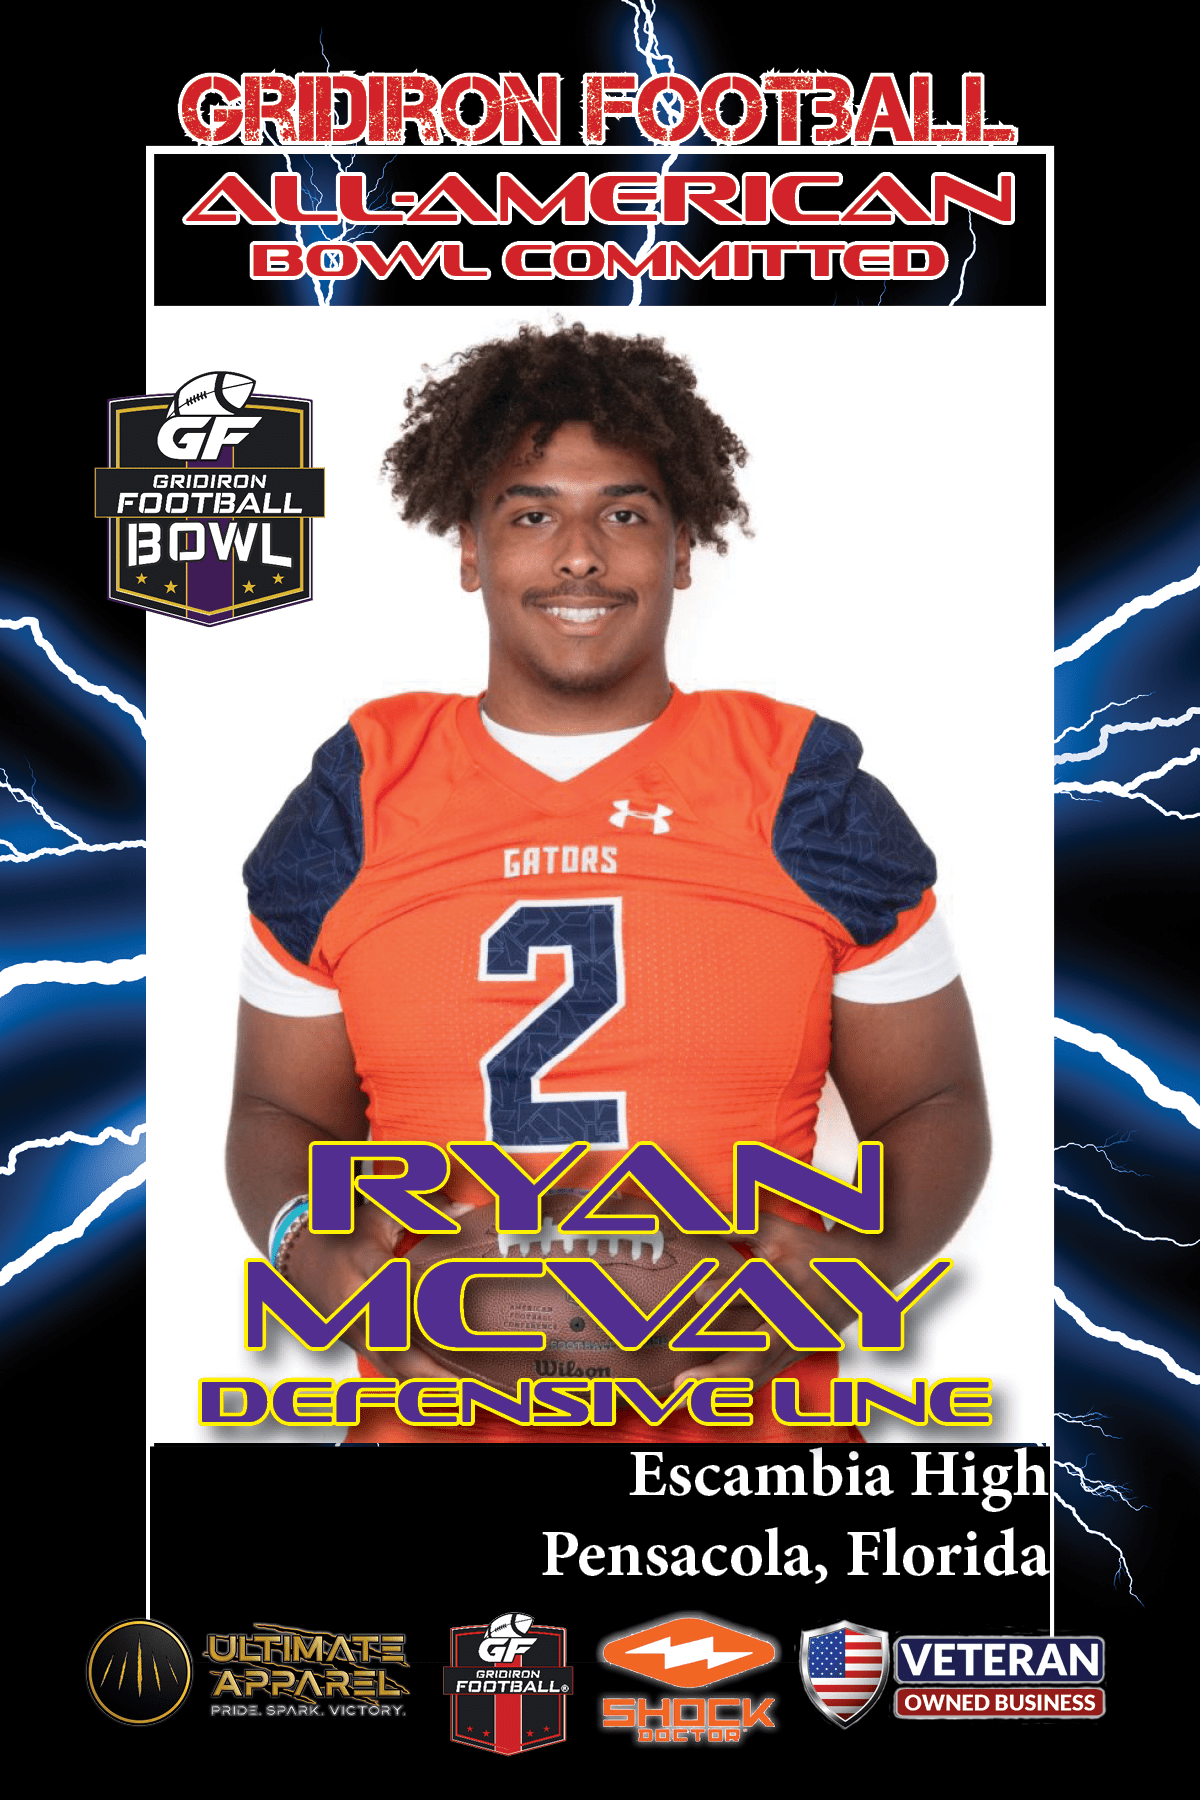 BREAKING NEWS: Escambia High School (Pensacola, Fla.) DE Ryan McVay has committed to play in the 2023 Gridiron Football All-American Bowl